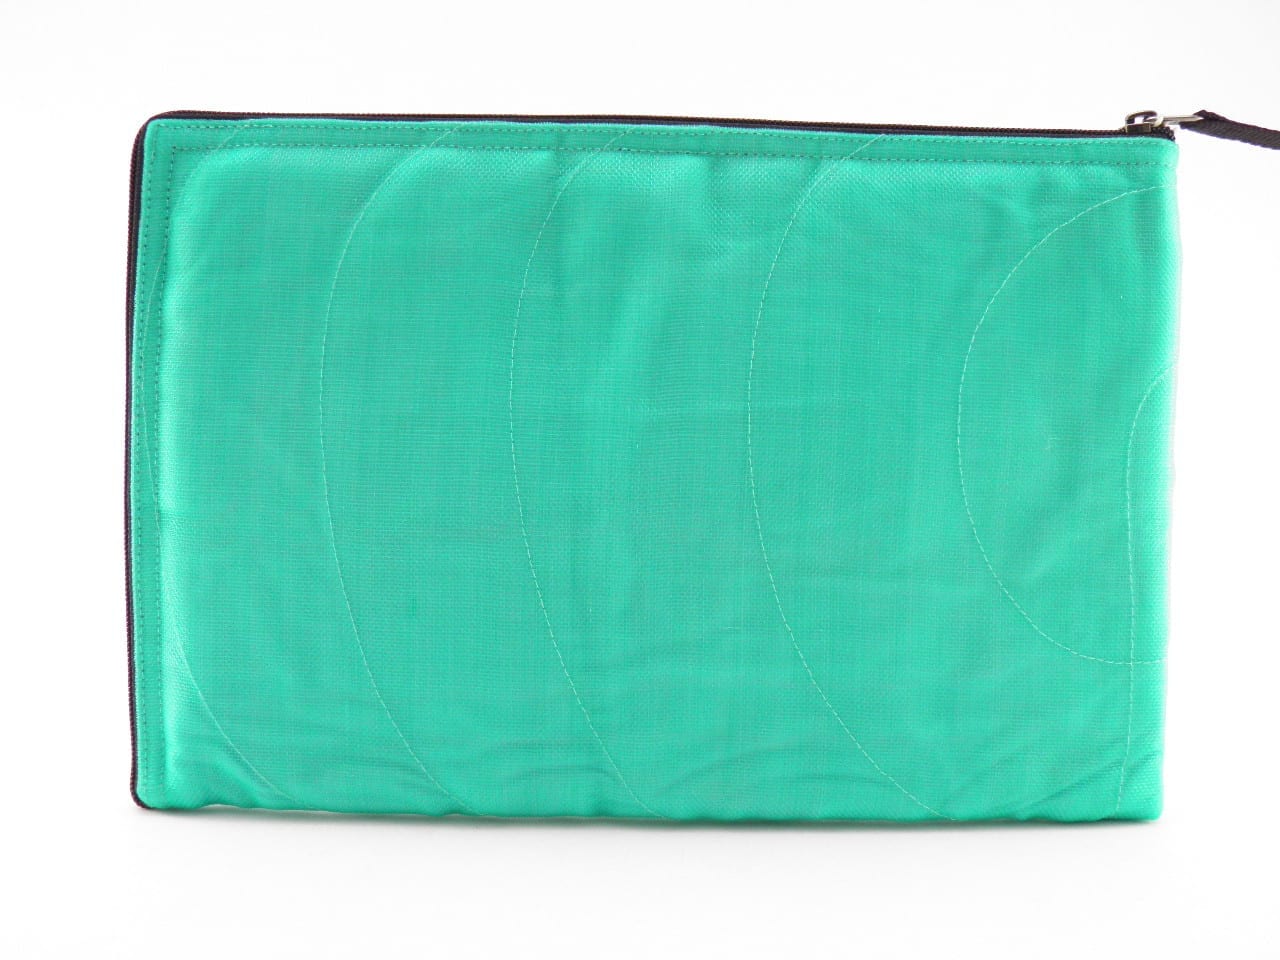 Server App – Ethic Tablet Sleeve 11 inch - Turquoise - verso